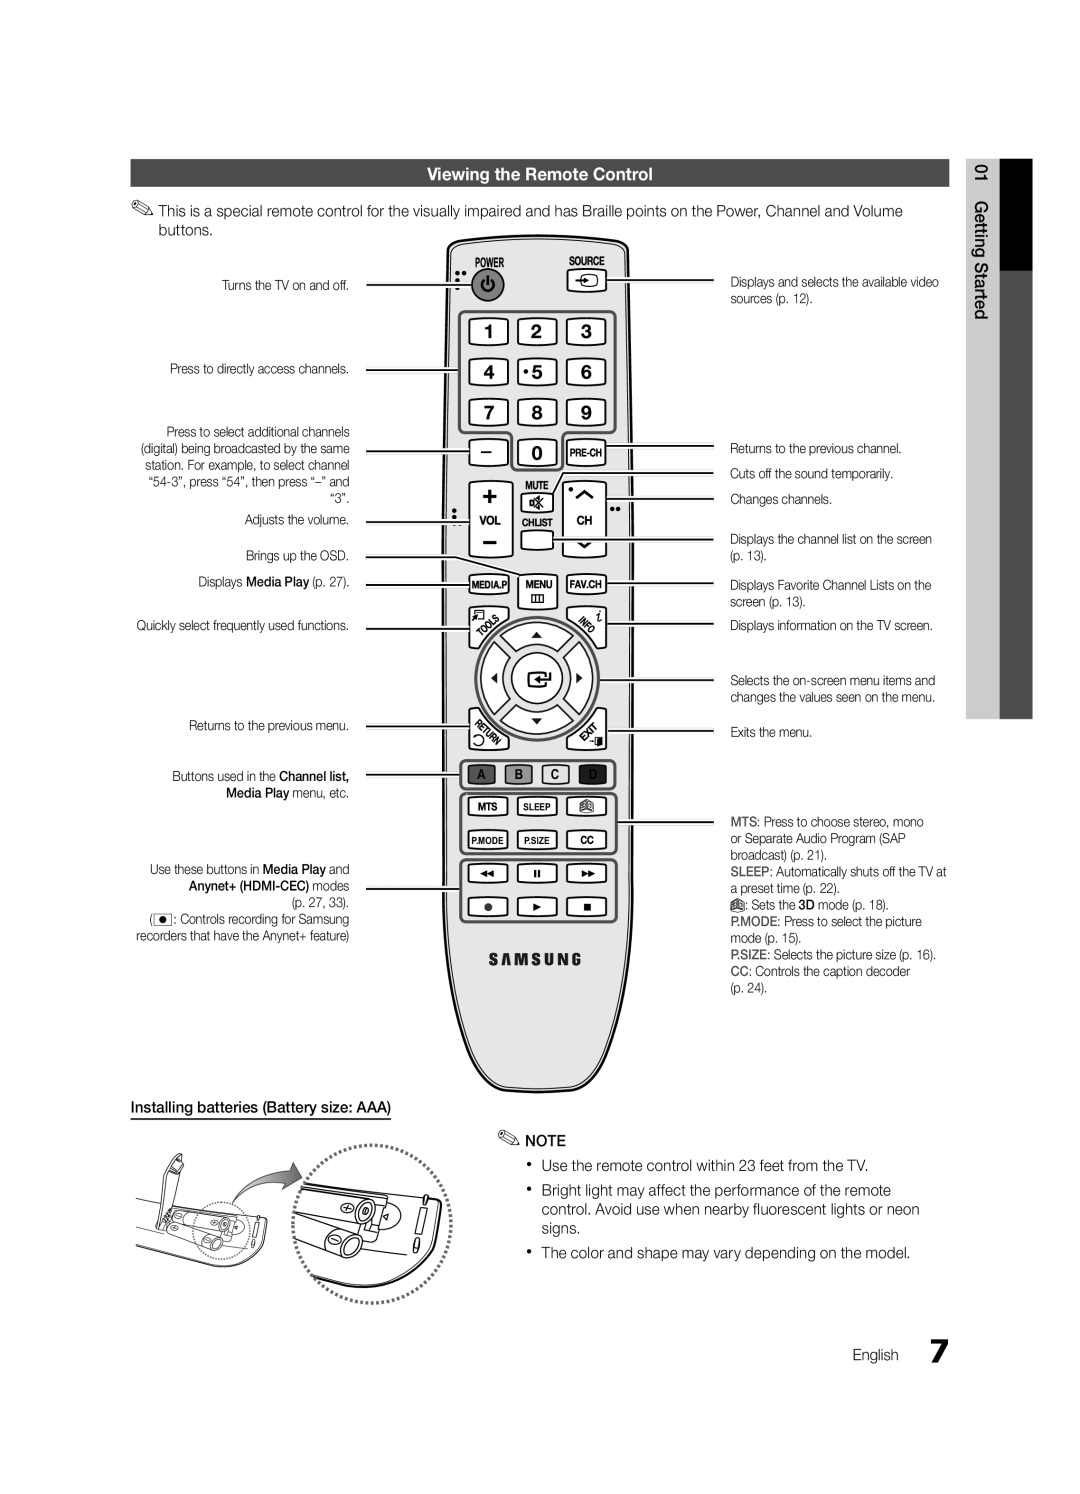 Samsung PC490-ZA, BN68-03114A-01 user manual Viewing the Remote Control, Installing batteries Battery size AAA, A B C D 